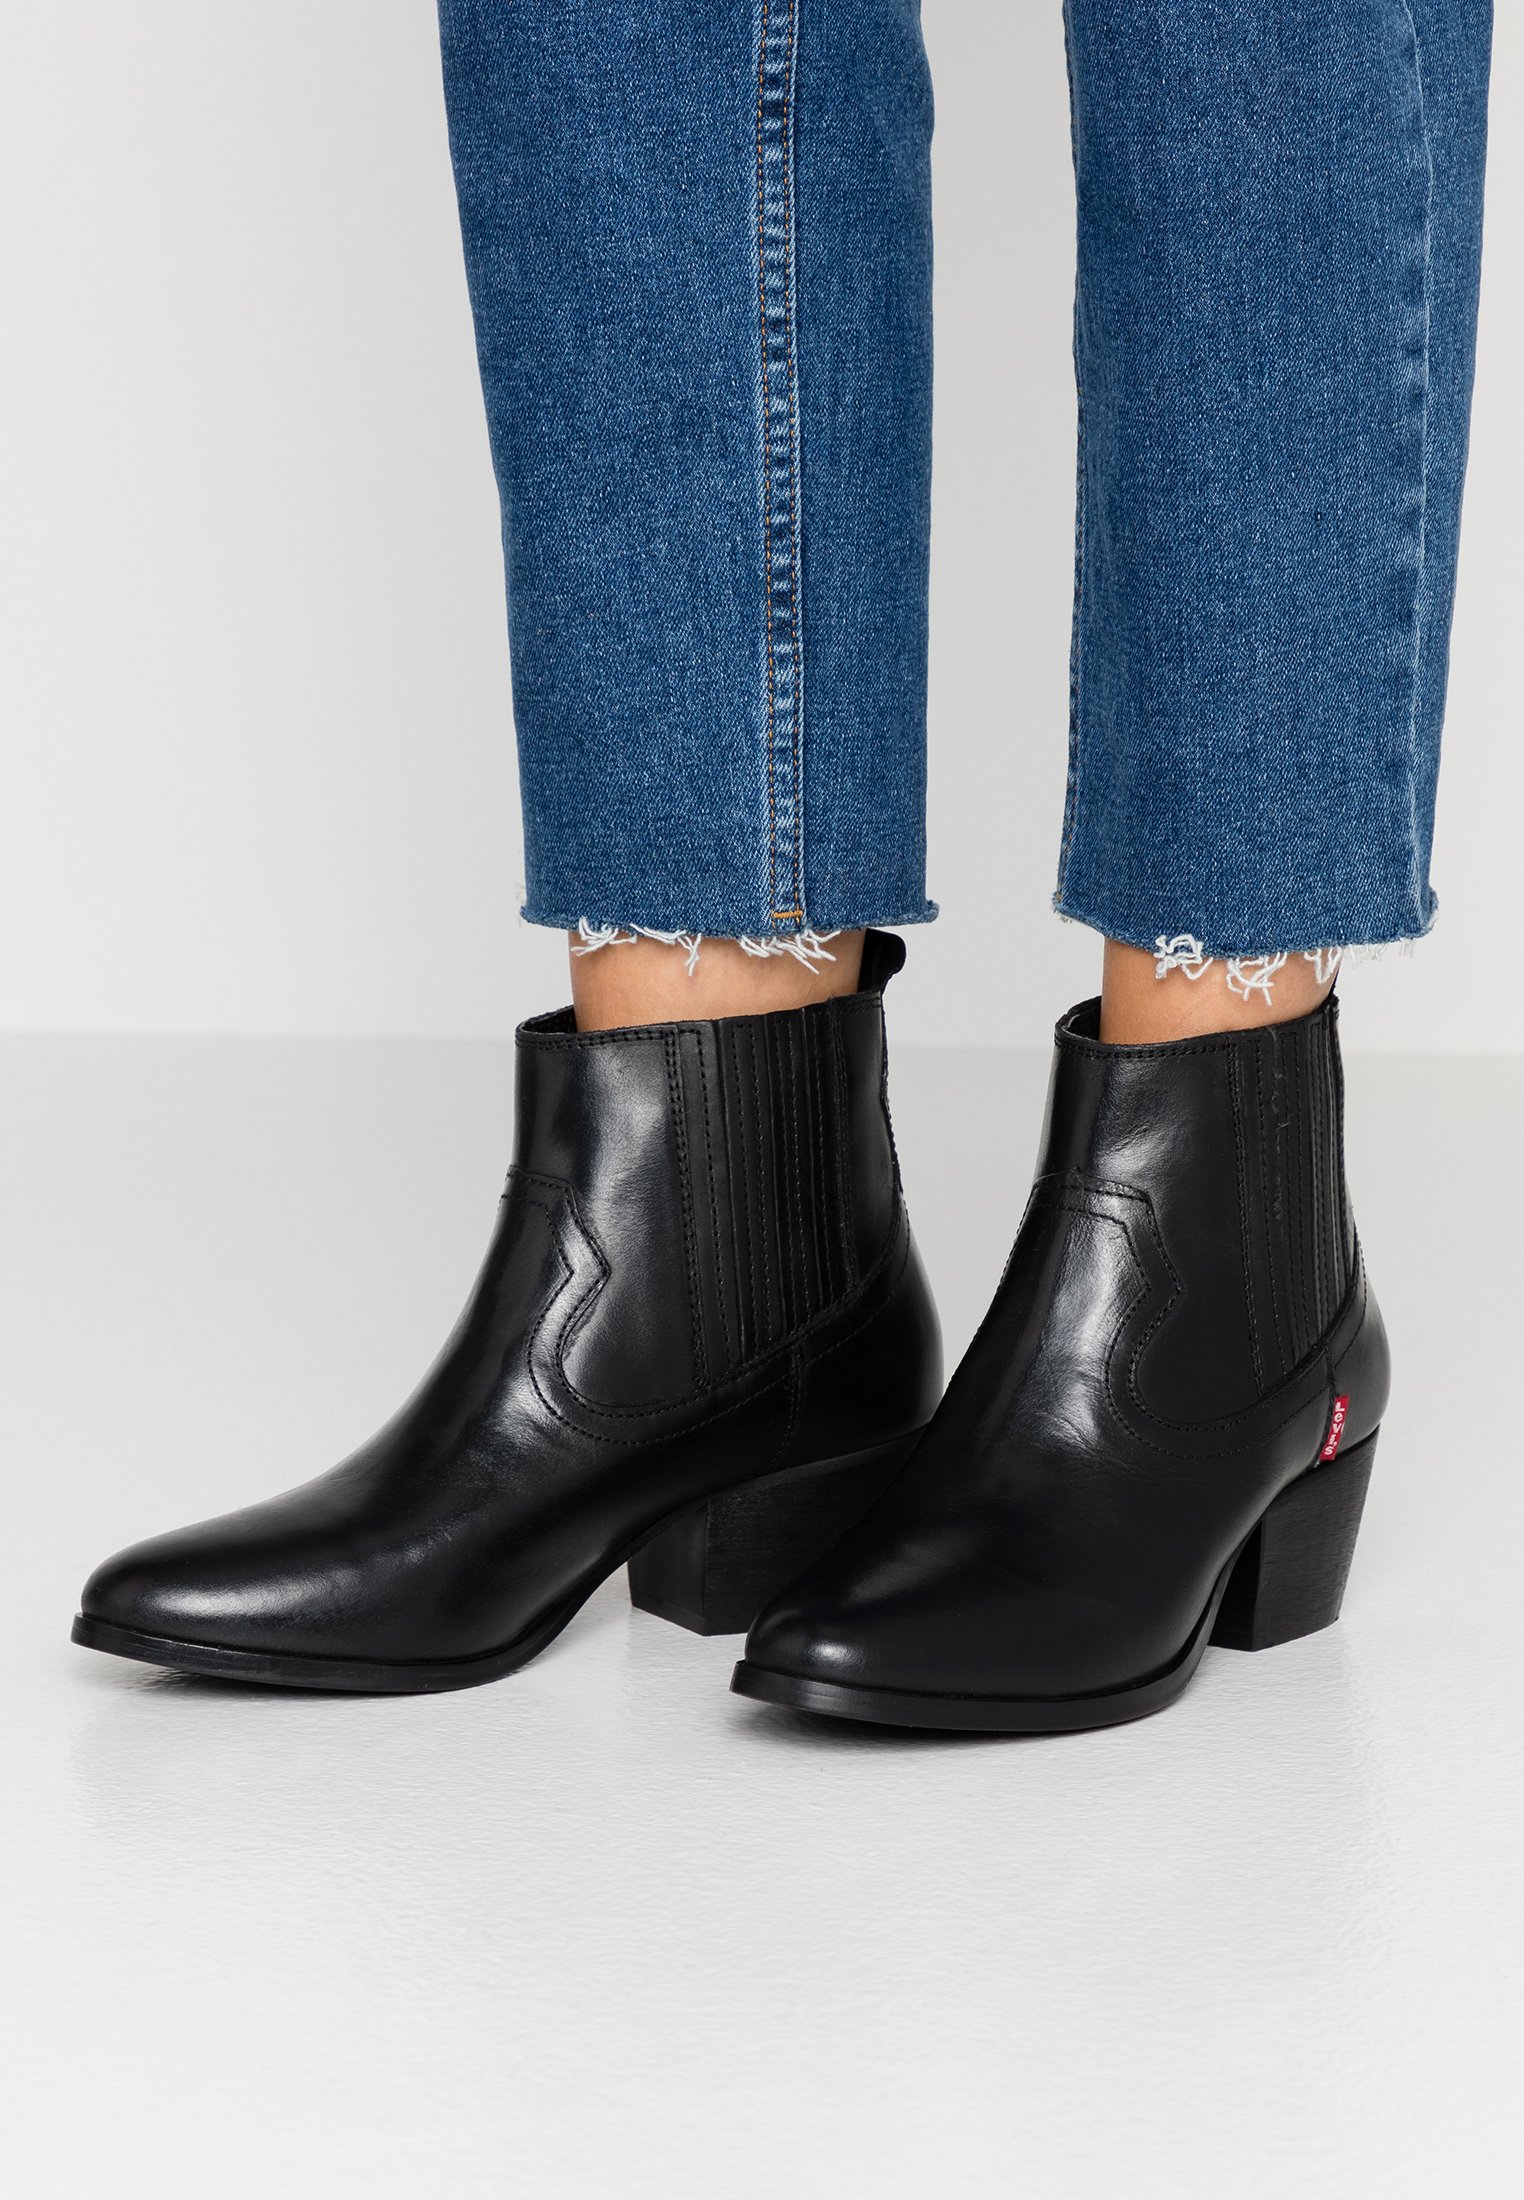 LEVIS Western Folsom Ankle Boot - Fashion Outlet